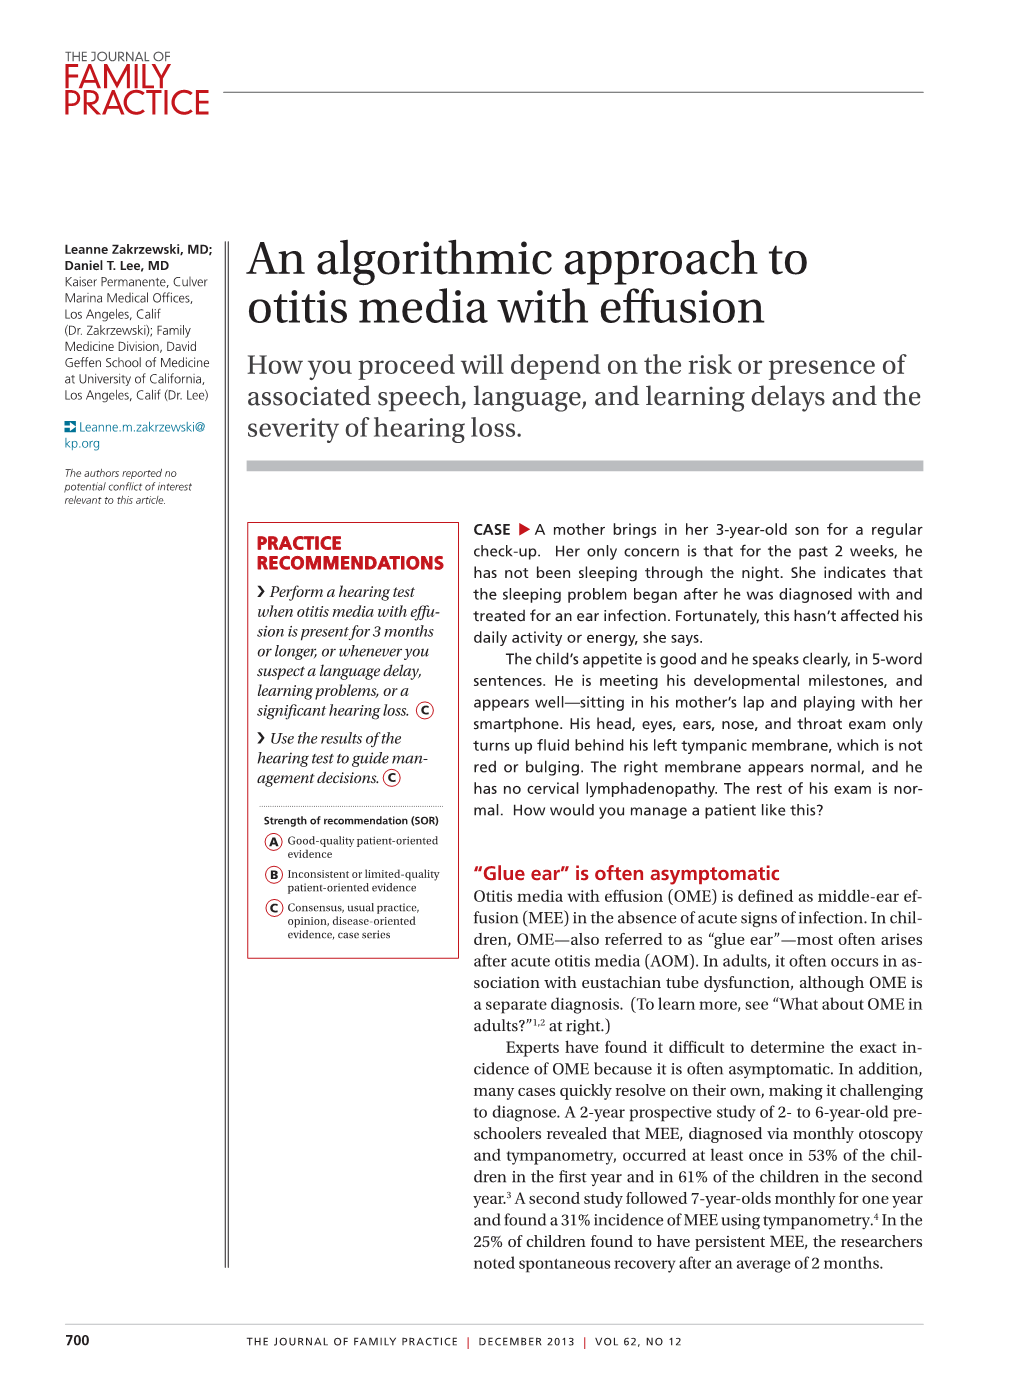 An Algorithmic Approach to Otitis Media with Effusion